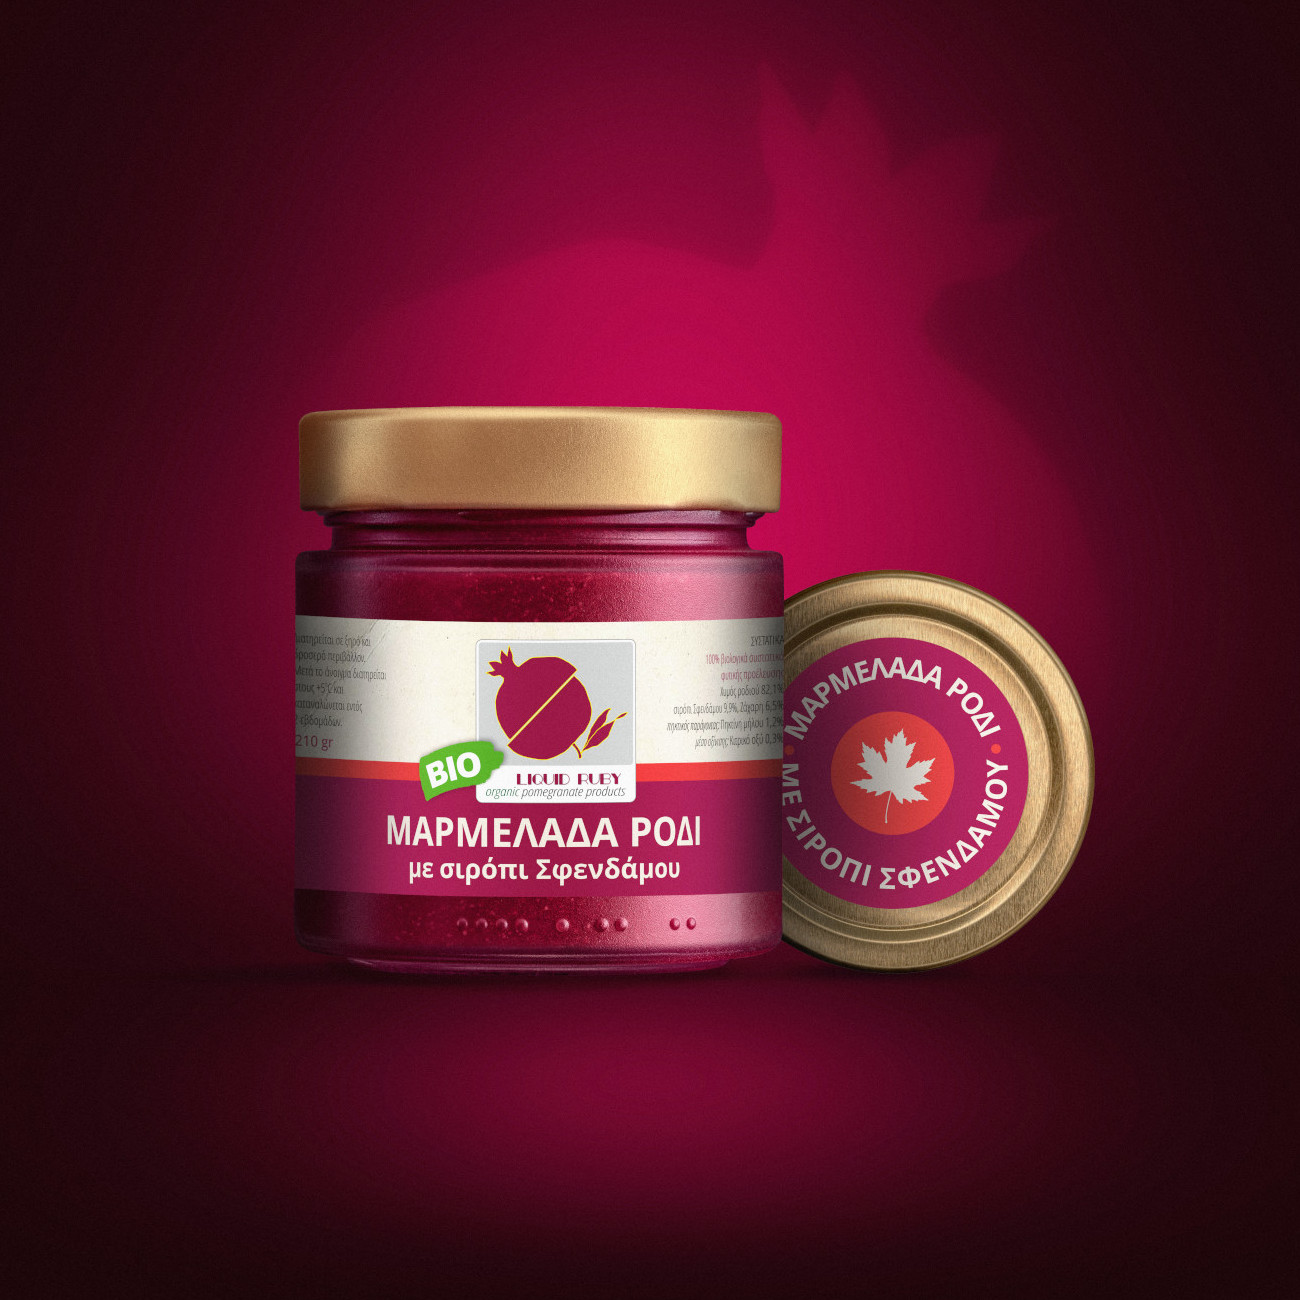 LIQUID RUBY ORGANIC POMEGRANATE JELLY with Maple syrup